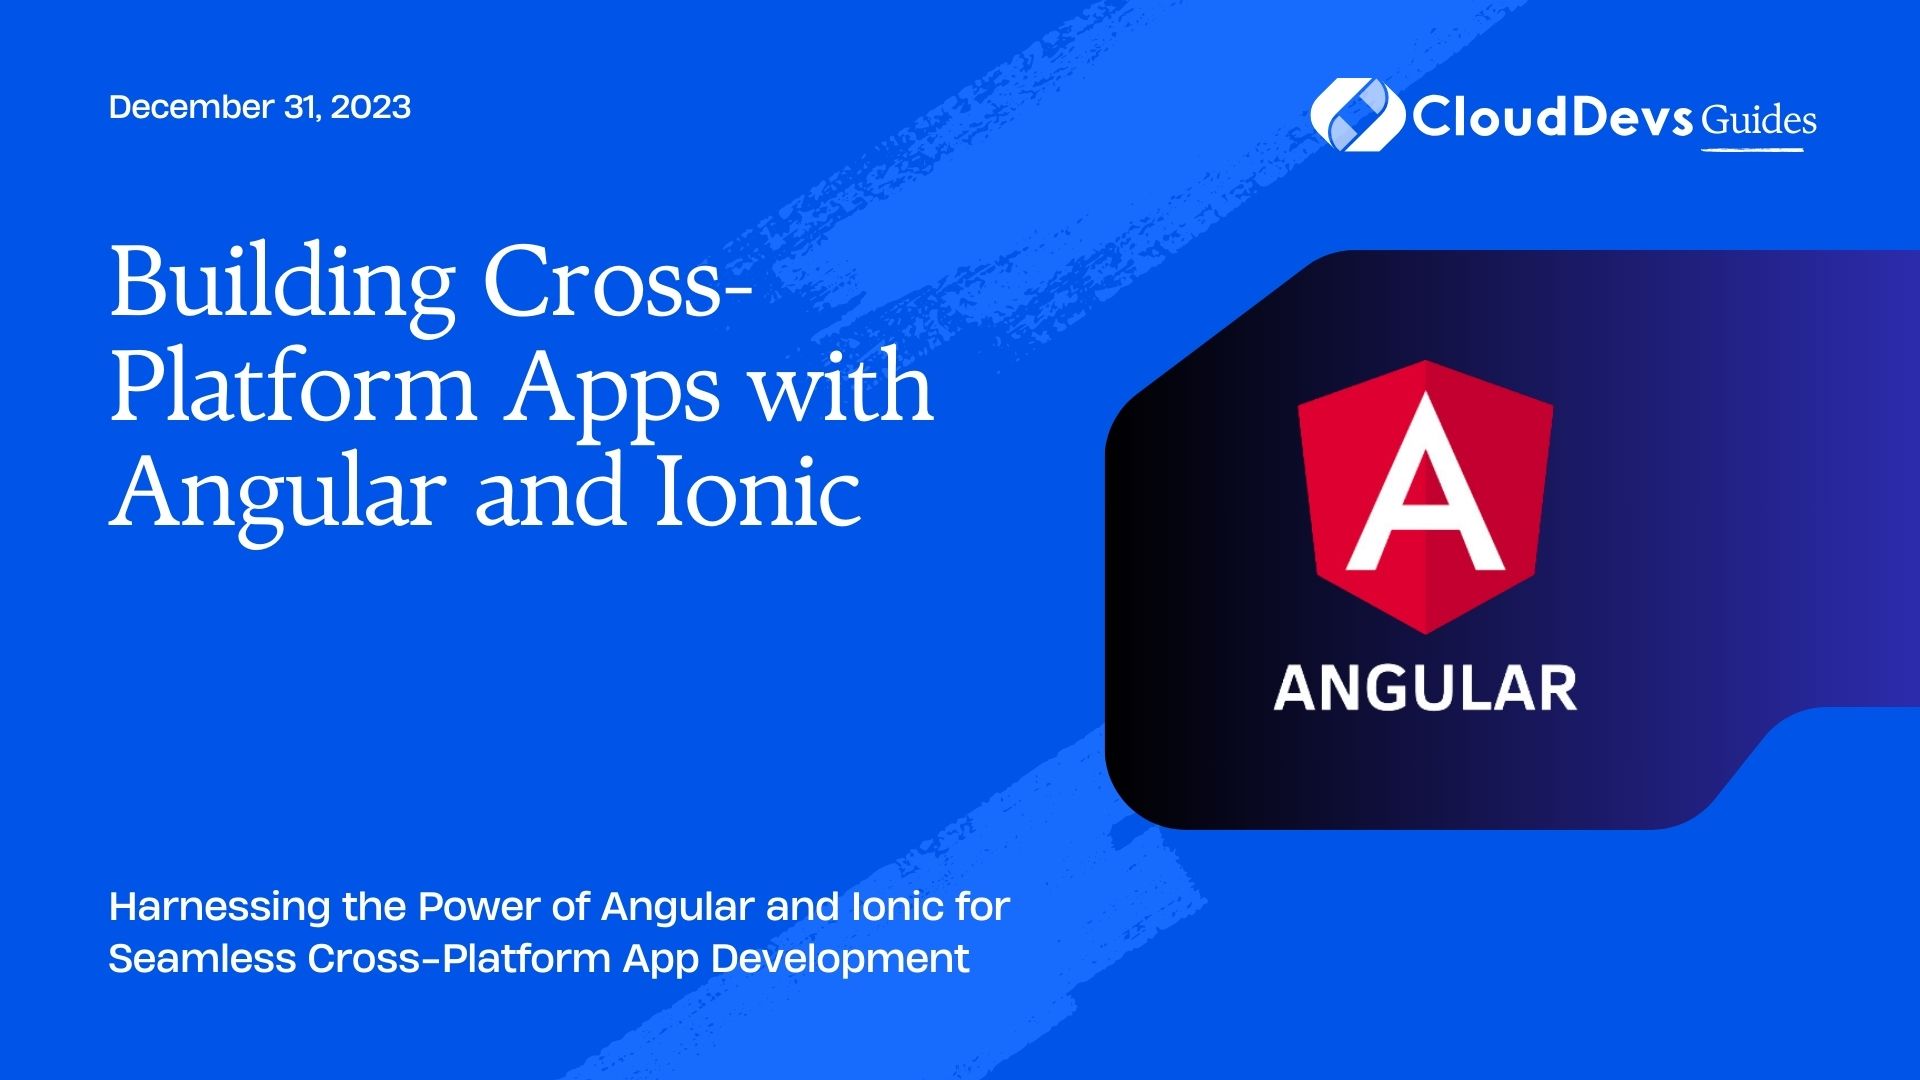 Building Cross-Platform Apps with Angular and Ionic